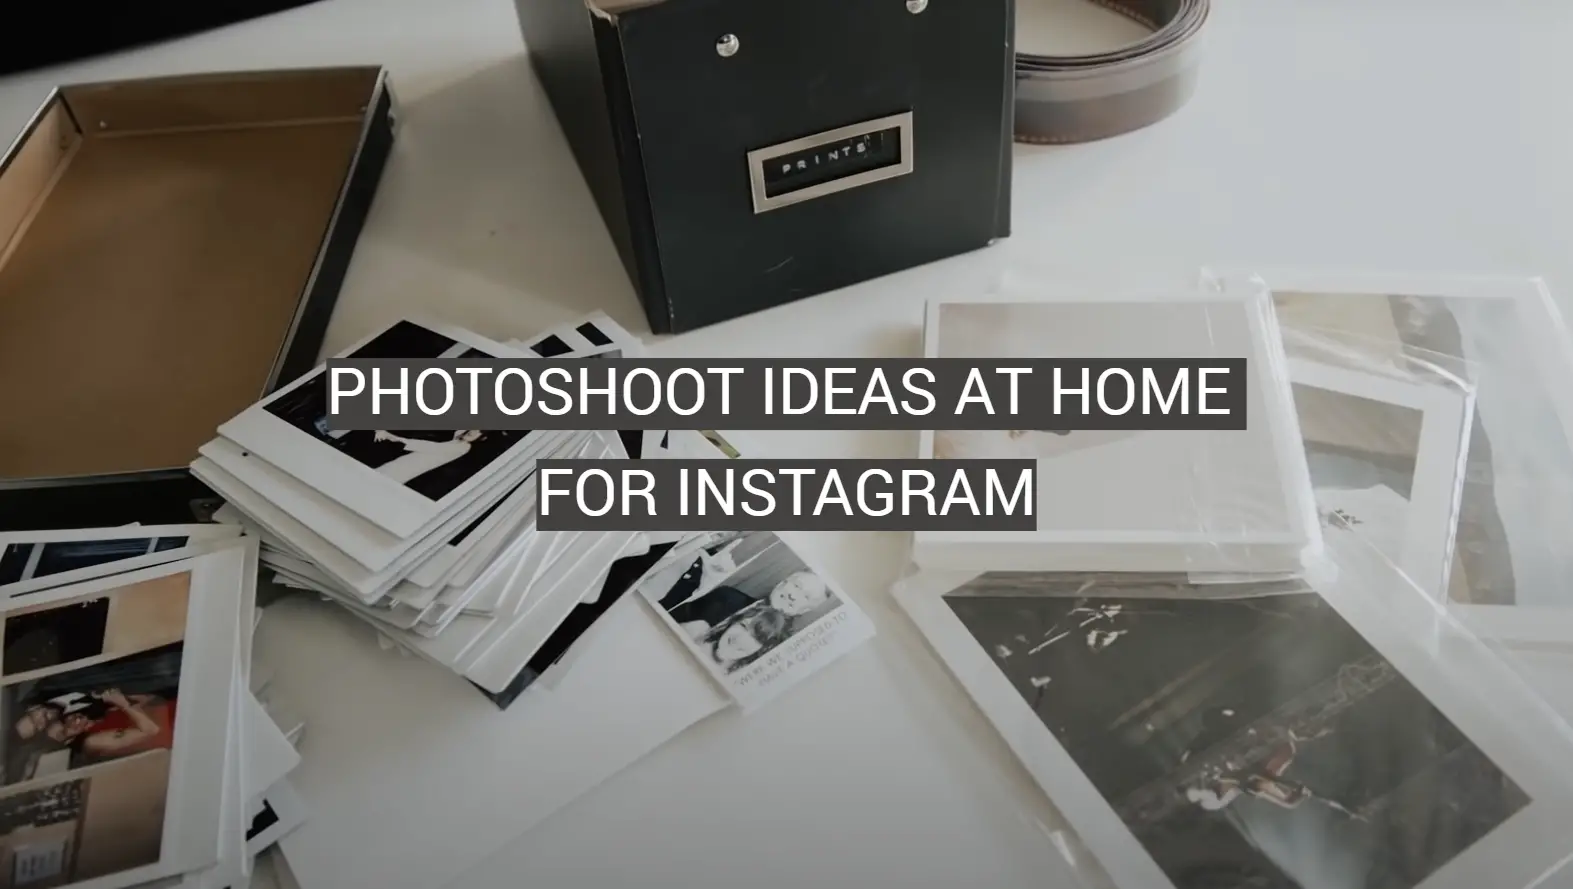 Photoshoot Ideas at Home for Instagram